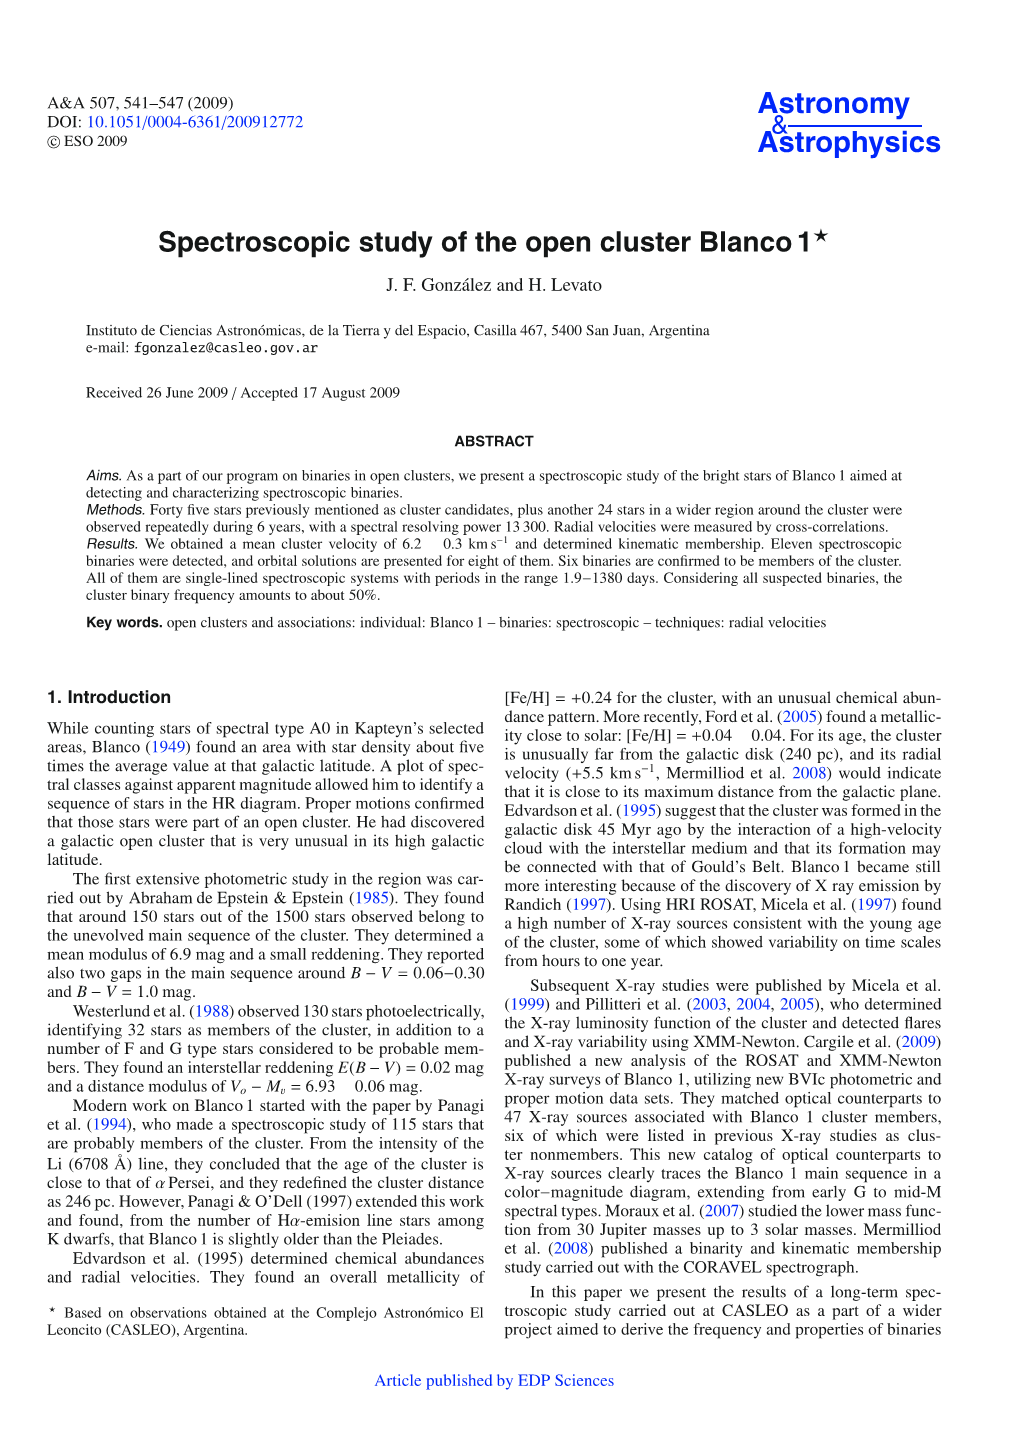 Spectroscopic Study of the Open Cluster Blanco 1